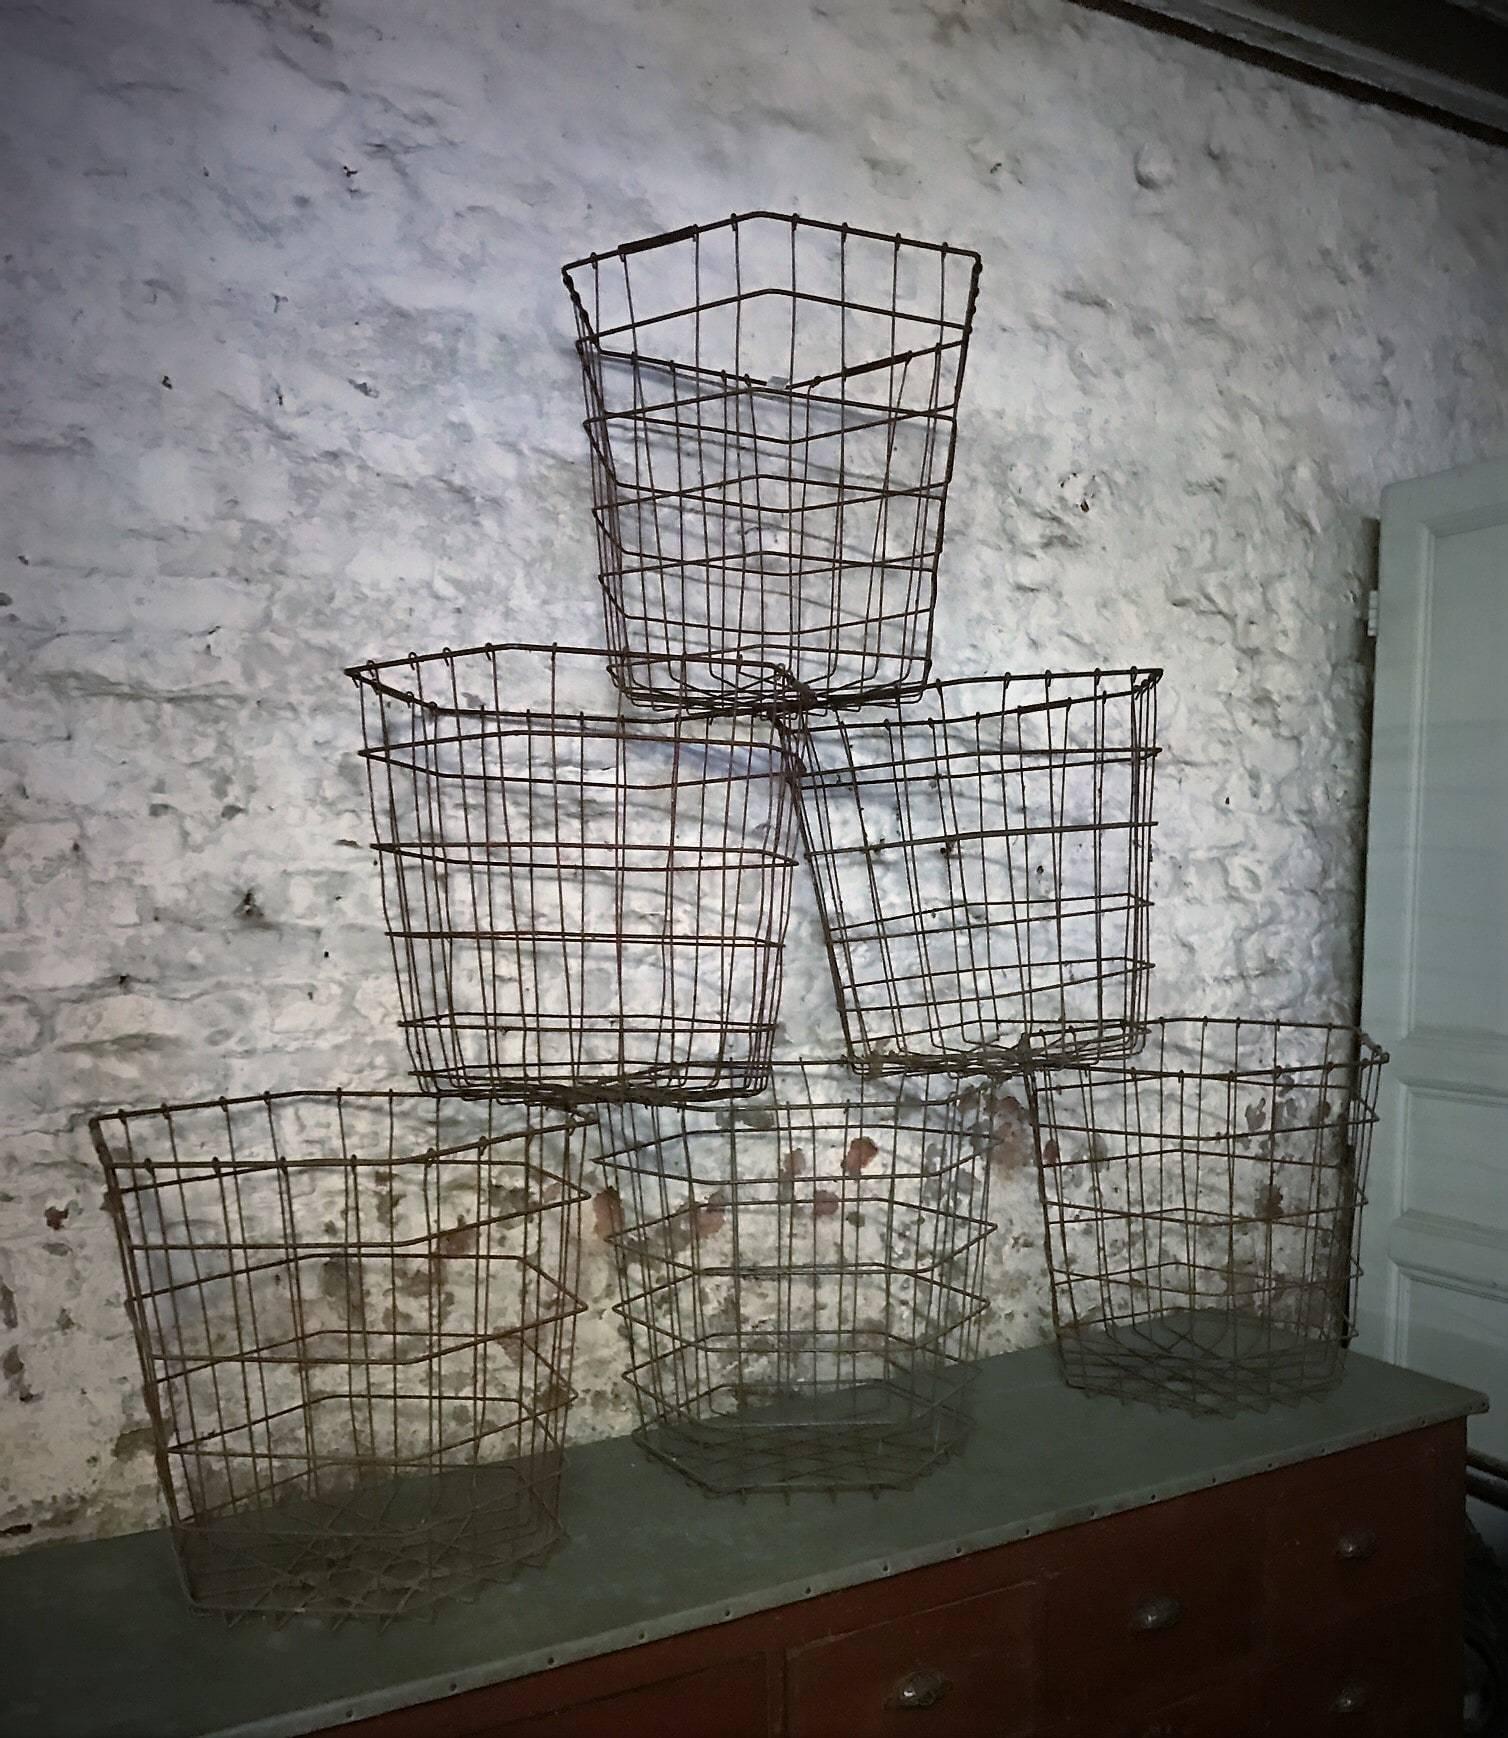 Add a rustic touch to your décor with this large round wire basket. As you can see, most of the paint has given way to light rust, giving it a very attractive, homey appearance. Sturdy and spacious, this basket has probably seen many uses, from